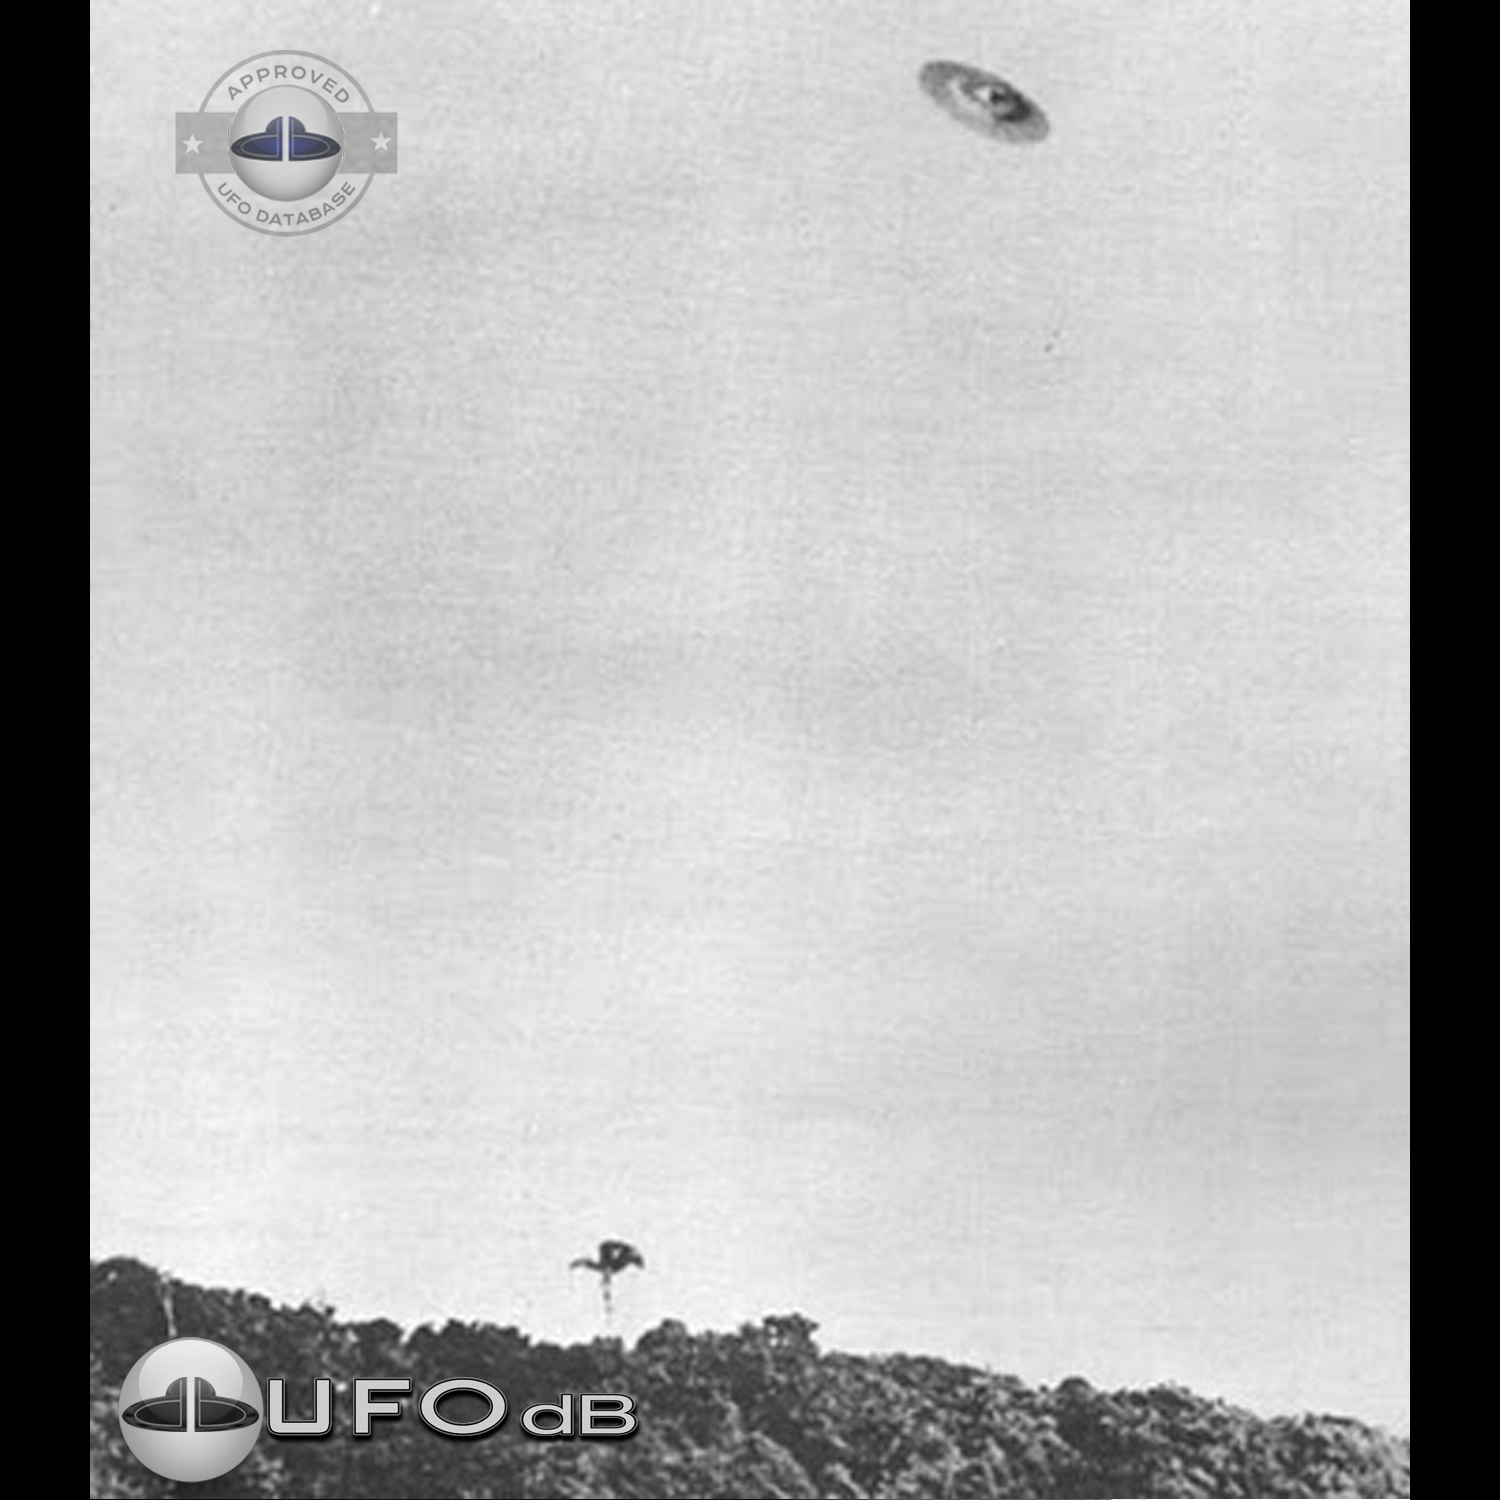 UFO picture considered by A.P.R.O | one of the best ufo picture 1952 UFO Picture #122-1